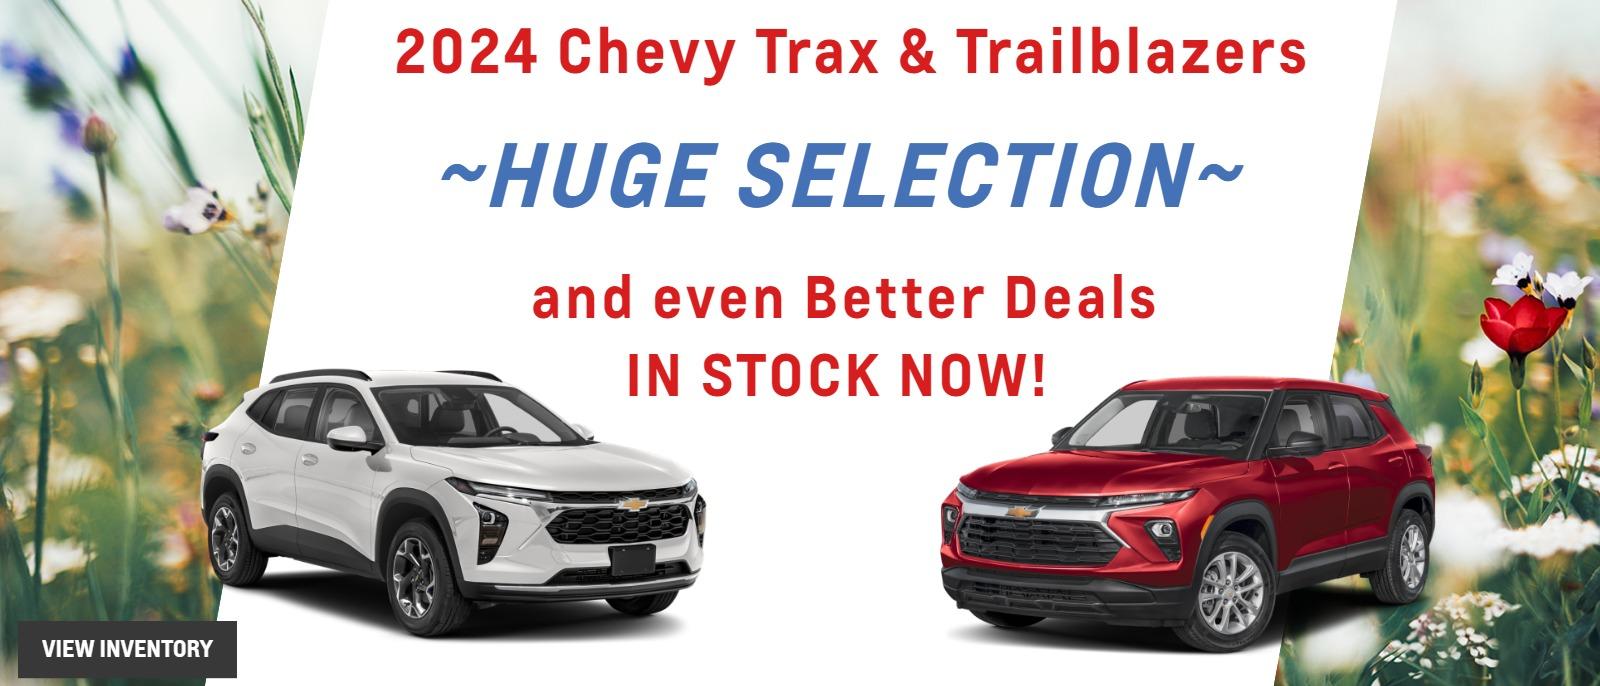 UGE SELECTION OF 2024 CHEVY TRAX & TRAILBLAZERS